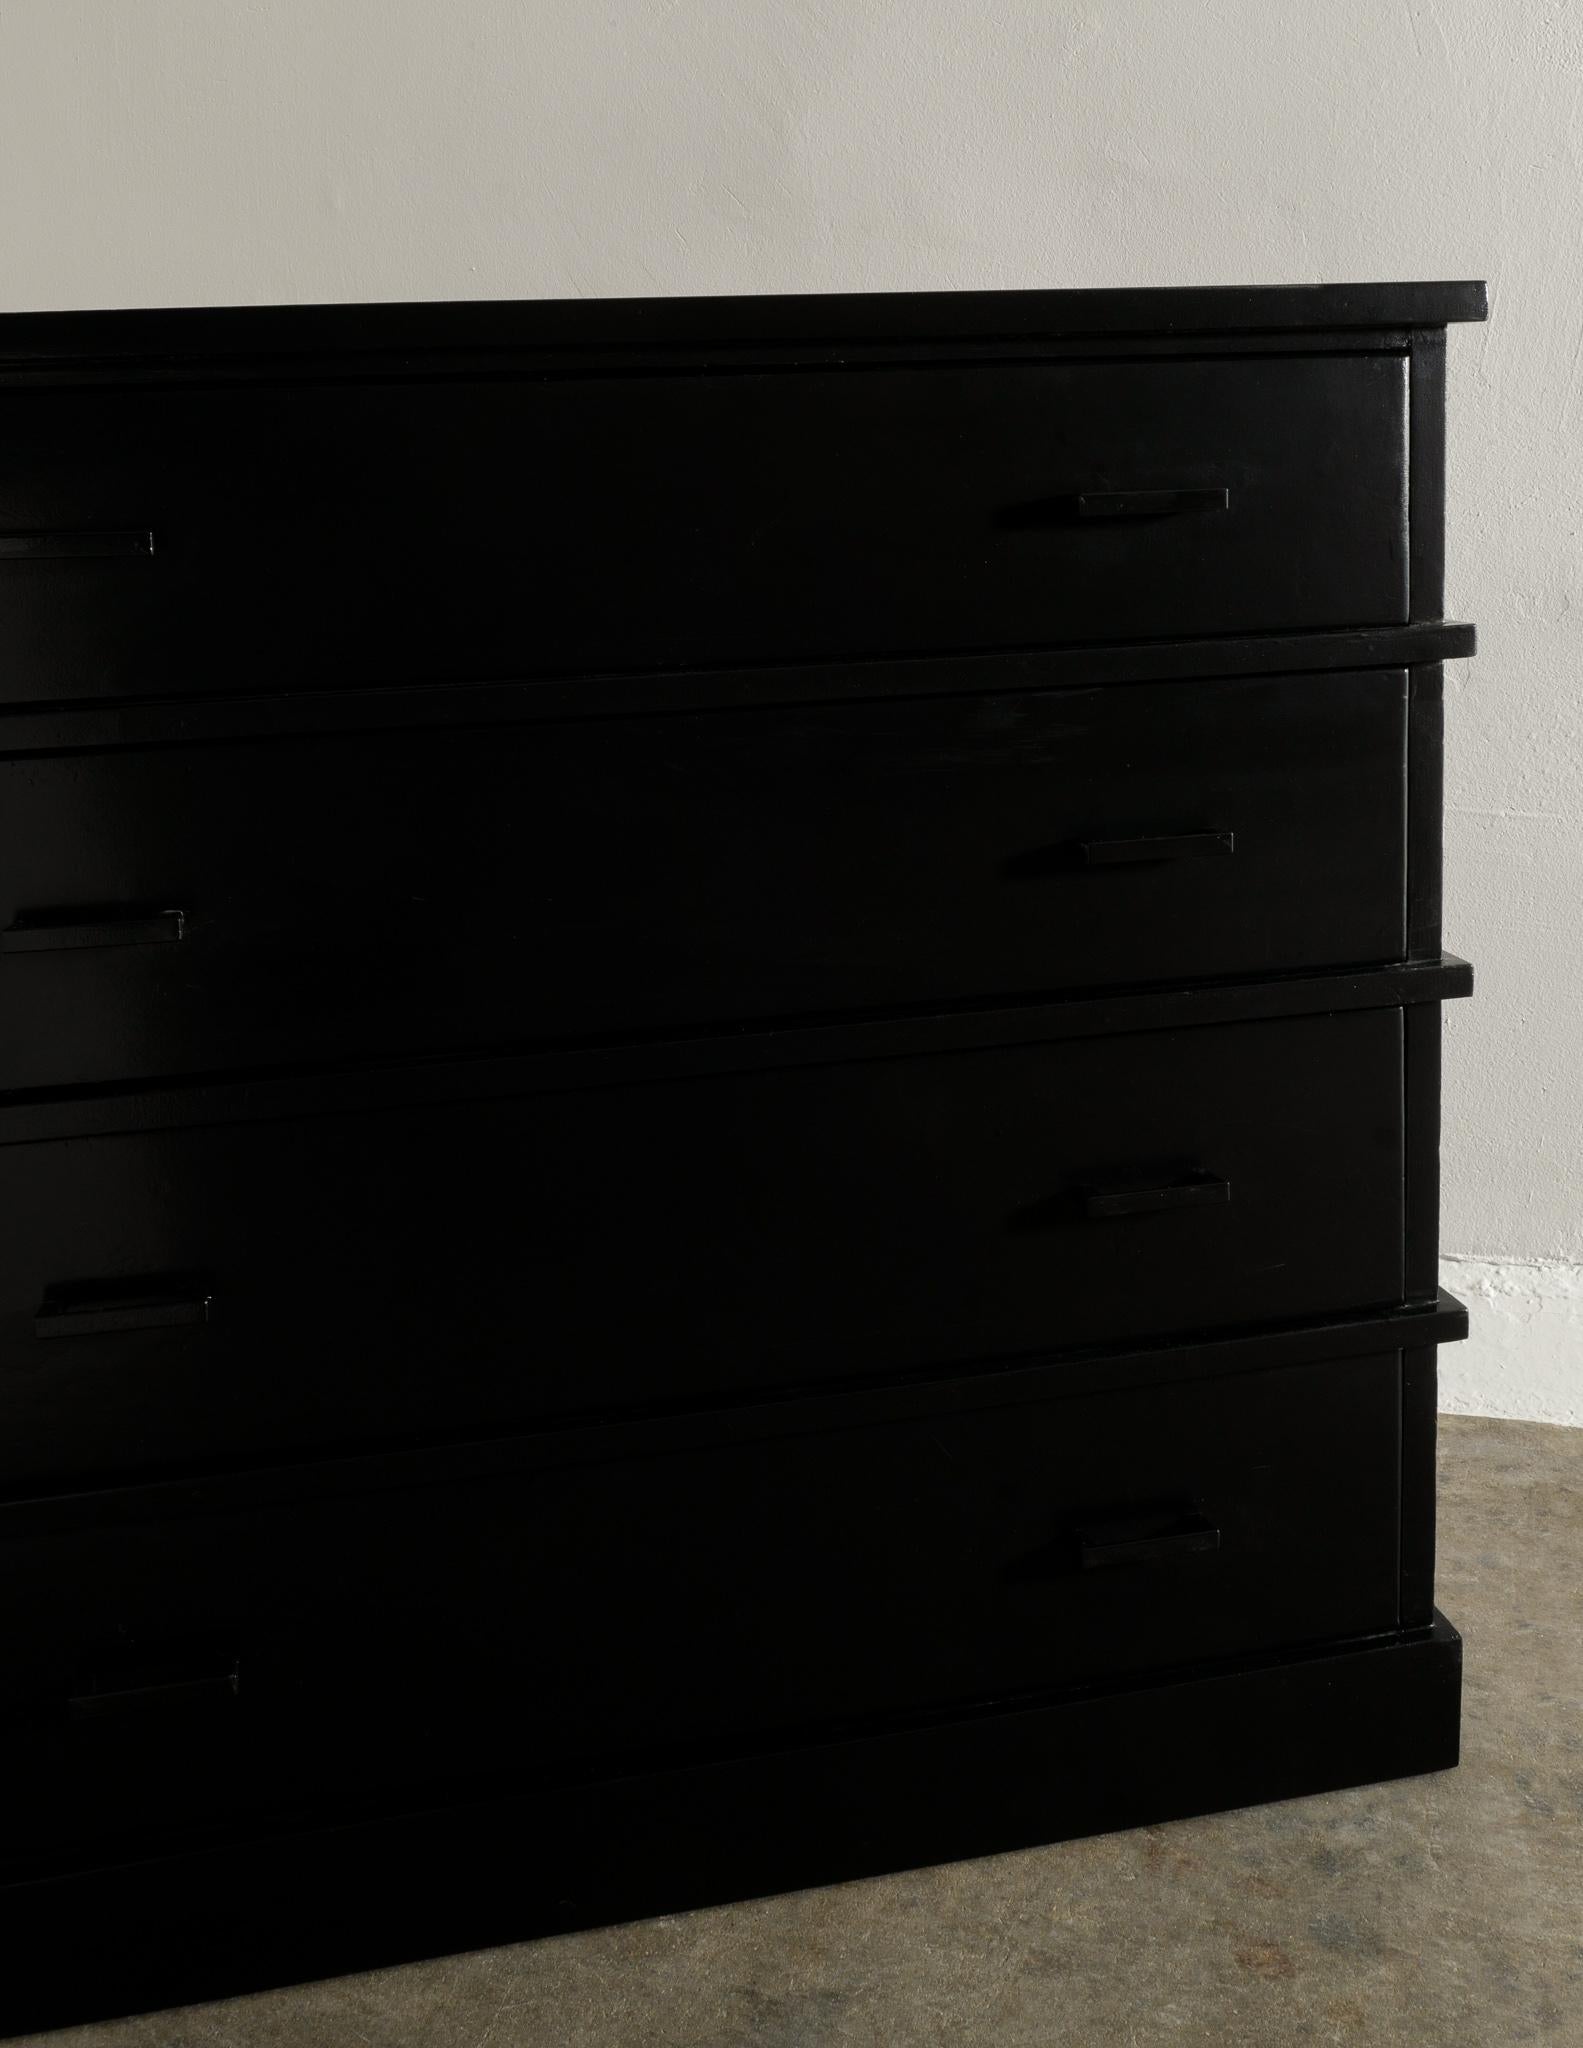 Early 20th Century Swedish Antique Chest of Drawers in Black Painted Pine Produced in Early 1900s